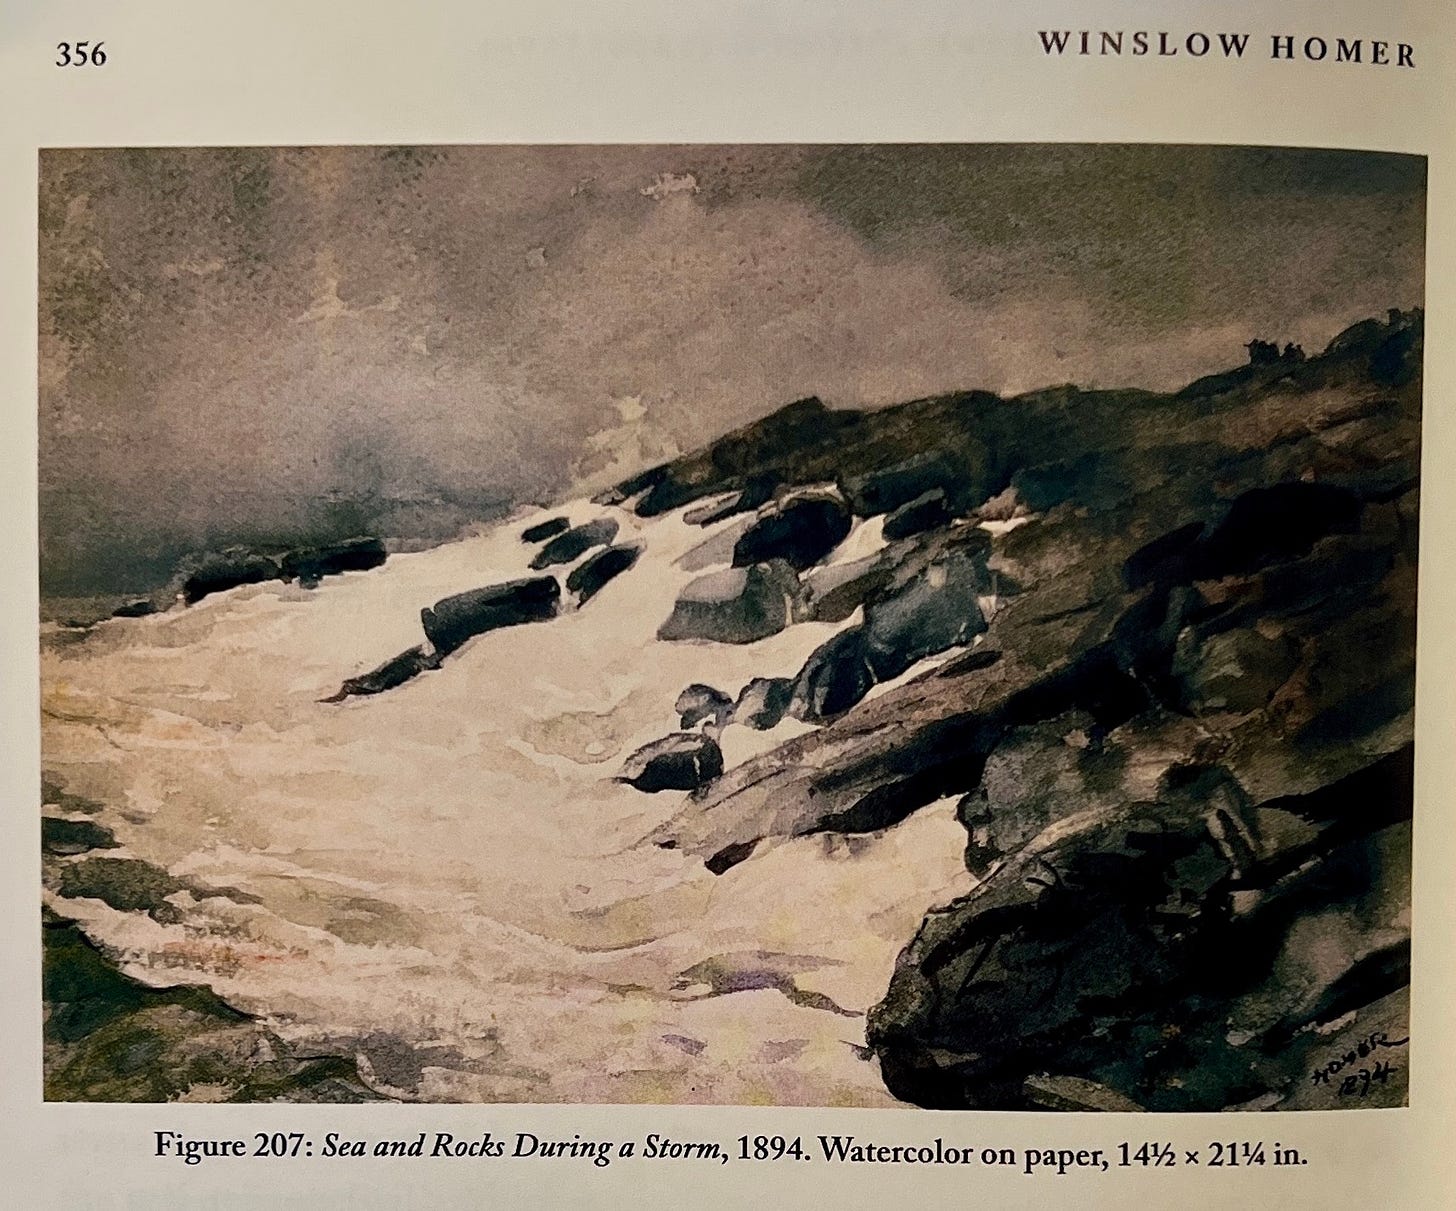 An image of a watercolor painting, taken from a book. The painting shows a rocky coastline and frothy surf.